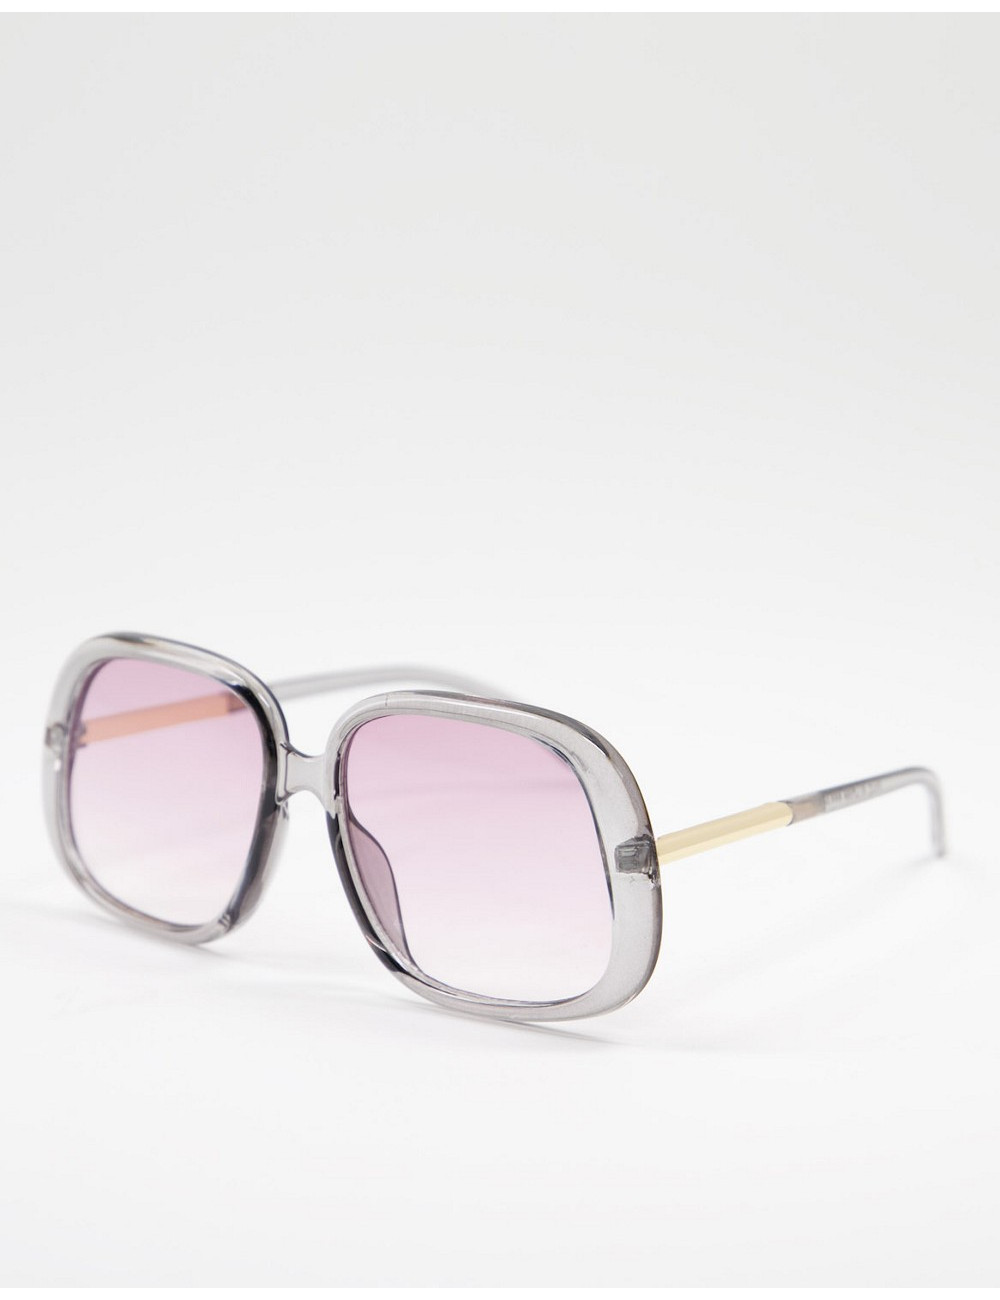 ASOS DESIGN 70s aviator sunglasses in brown ombre with purple lens